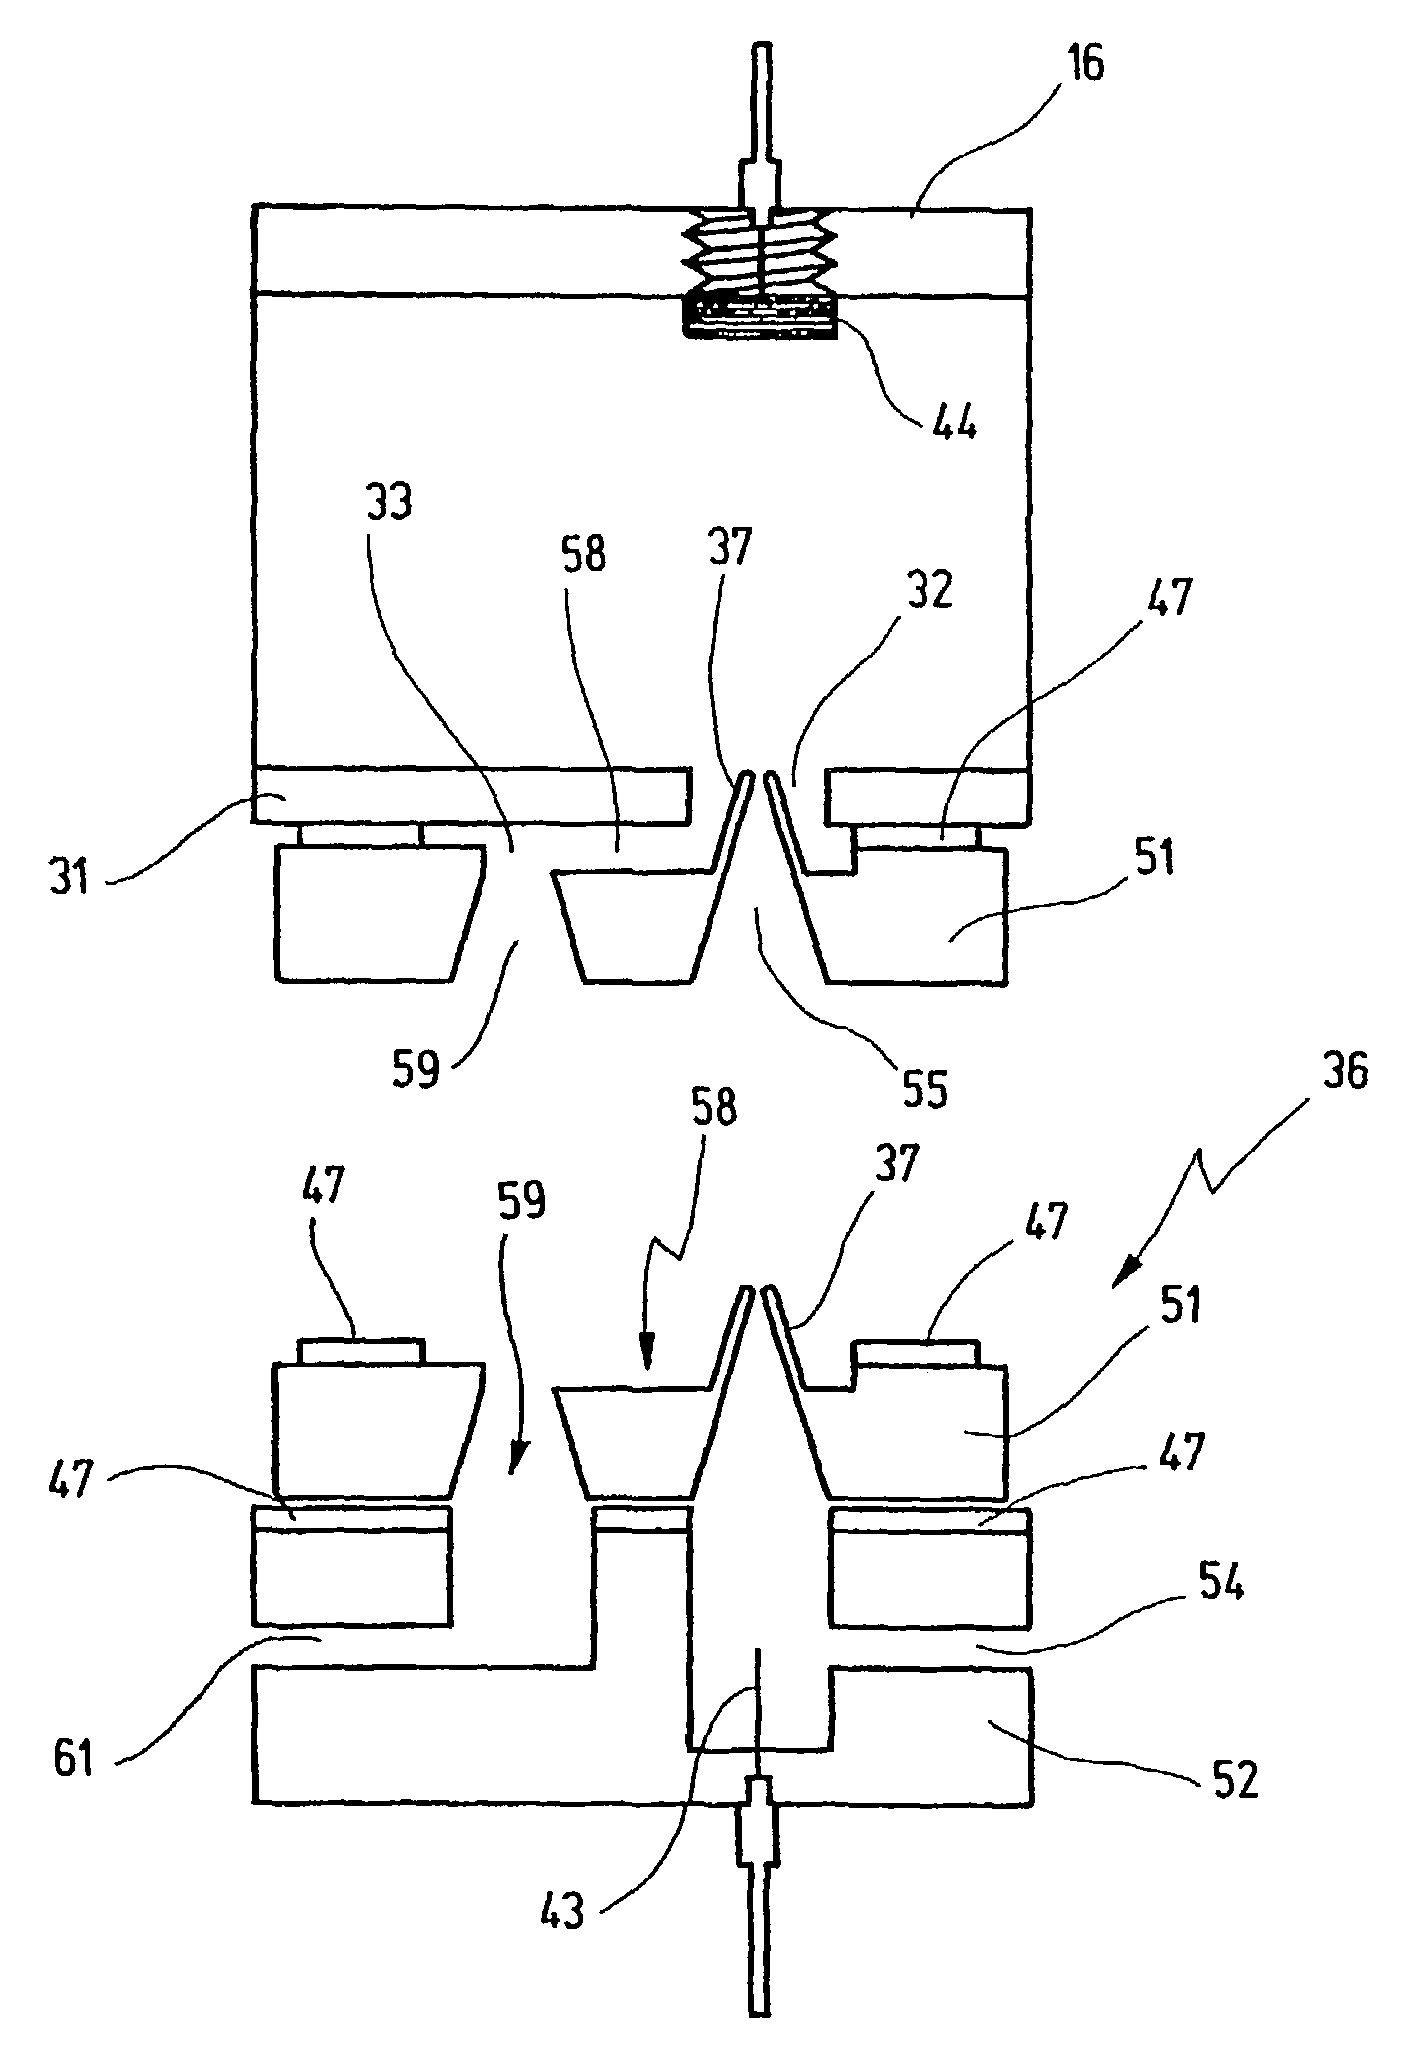 Apparatus and method for electrically contacting biological cells suspended in a liquid